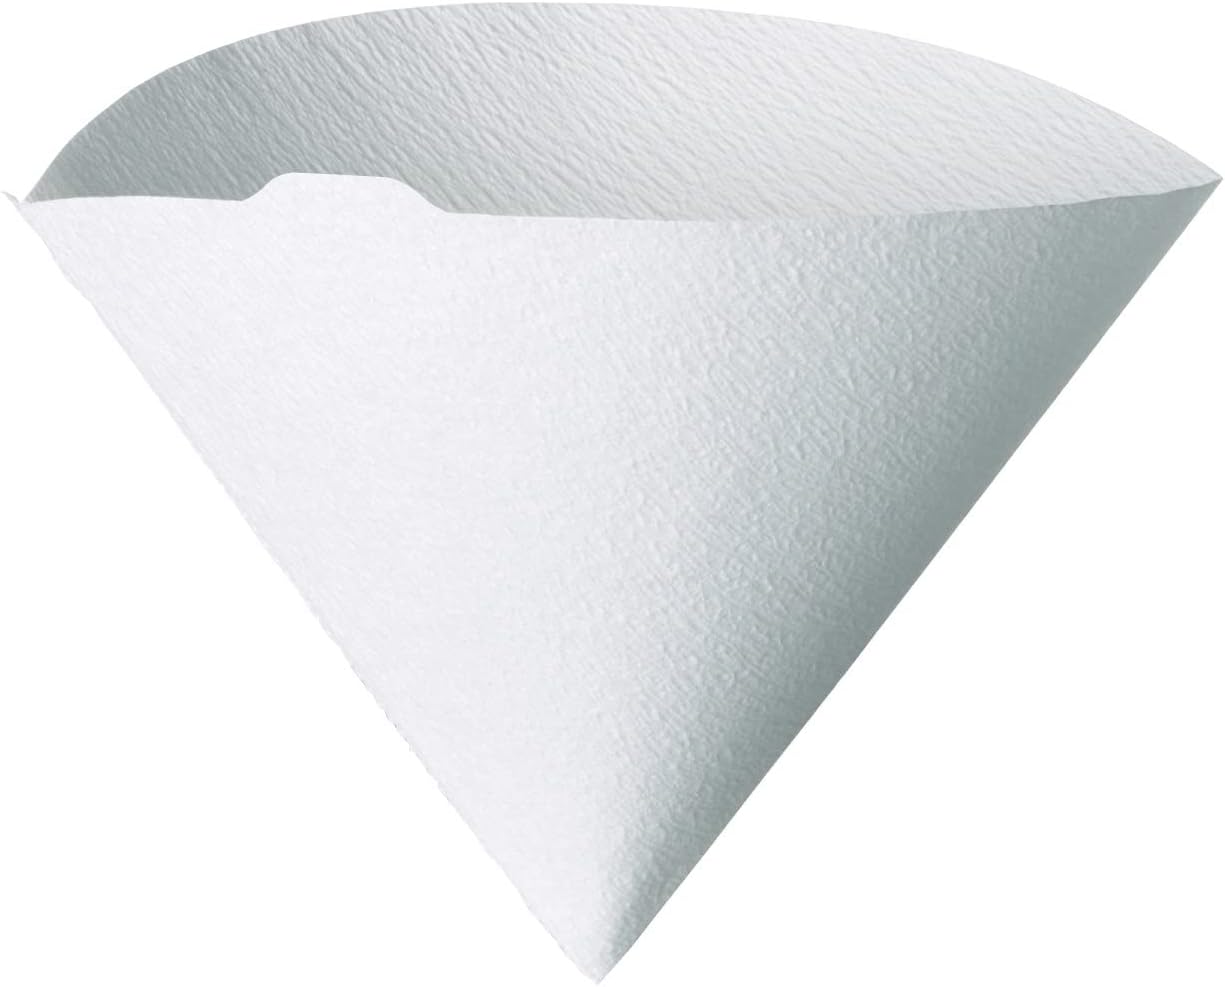 Hario White Paper Filters for V60 03 (100 sheets)